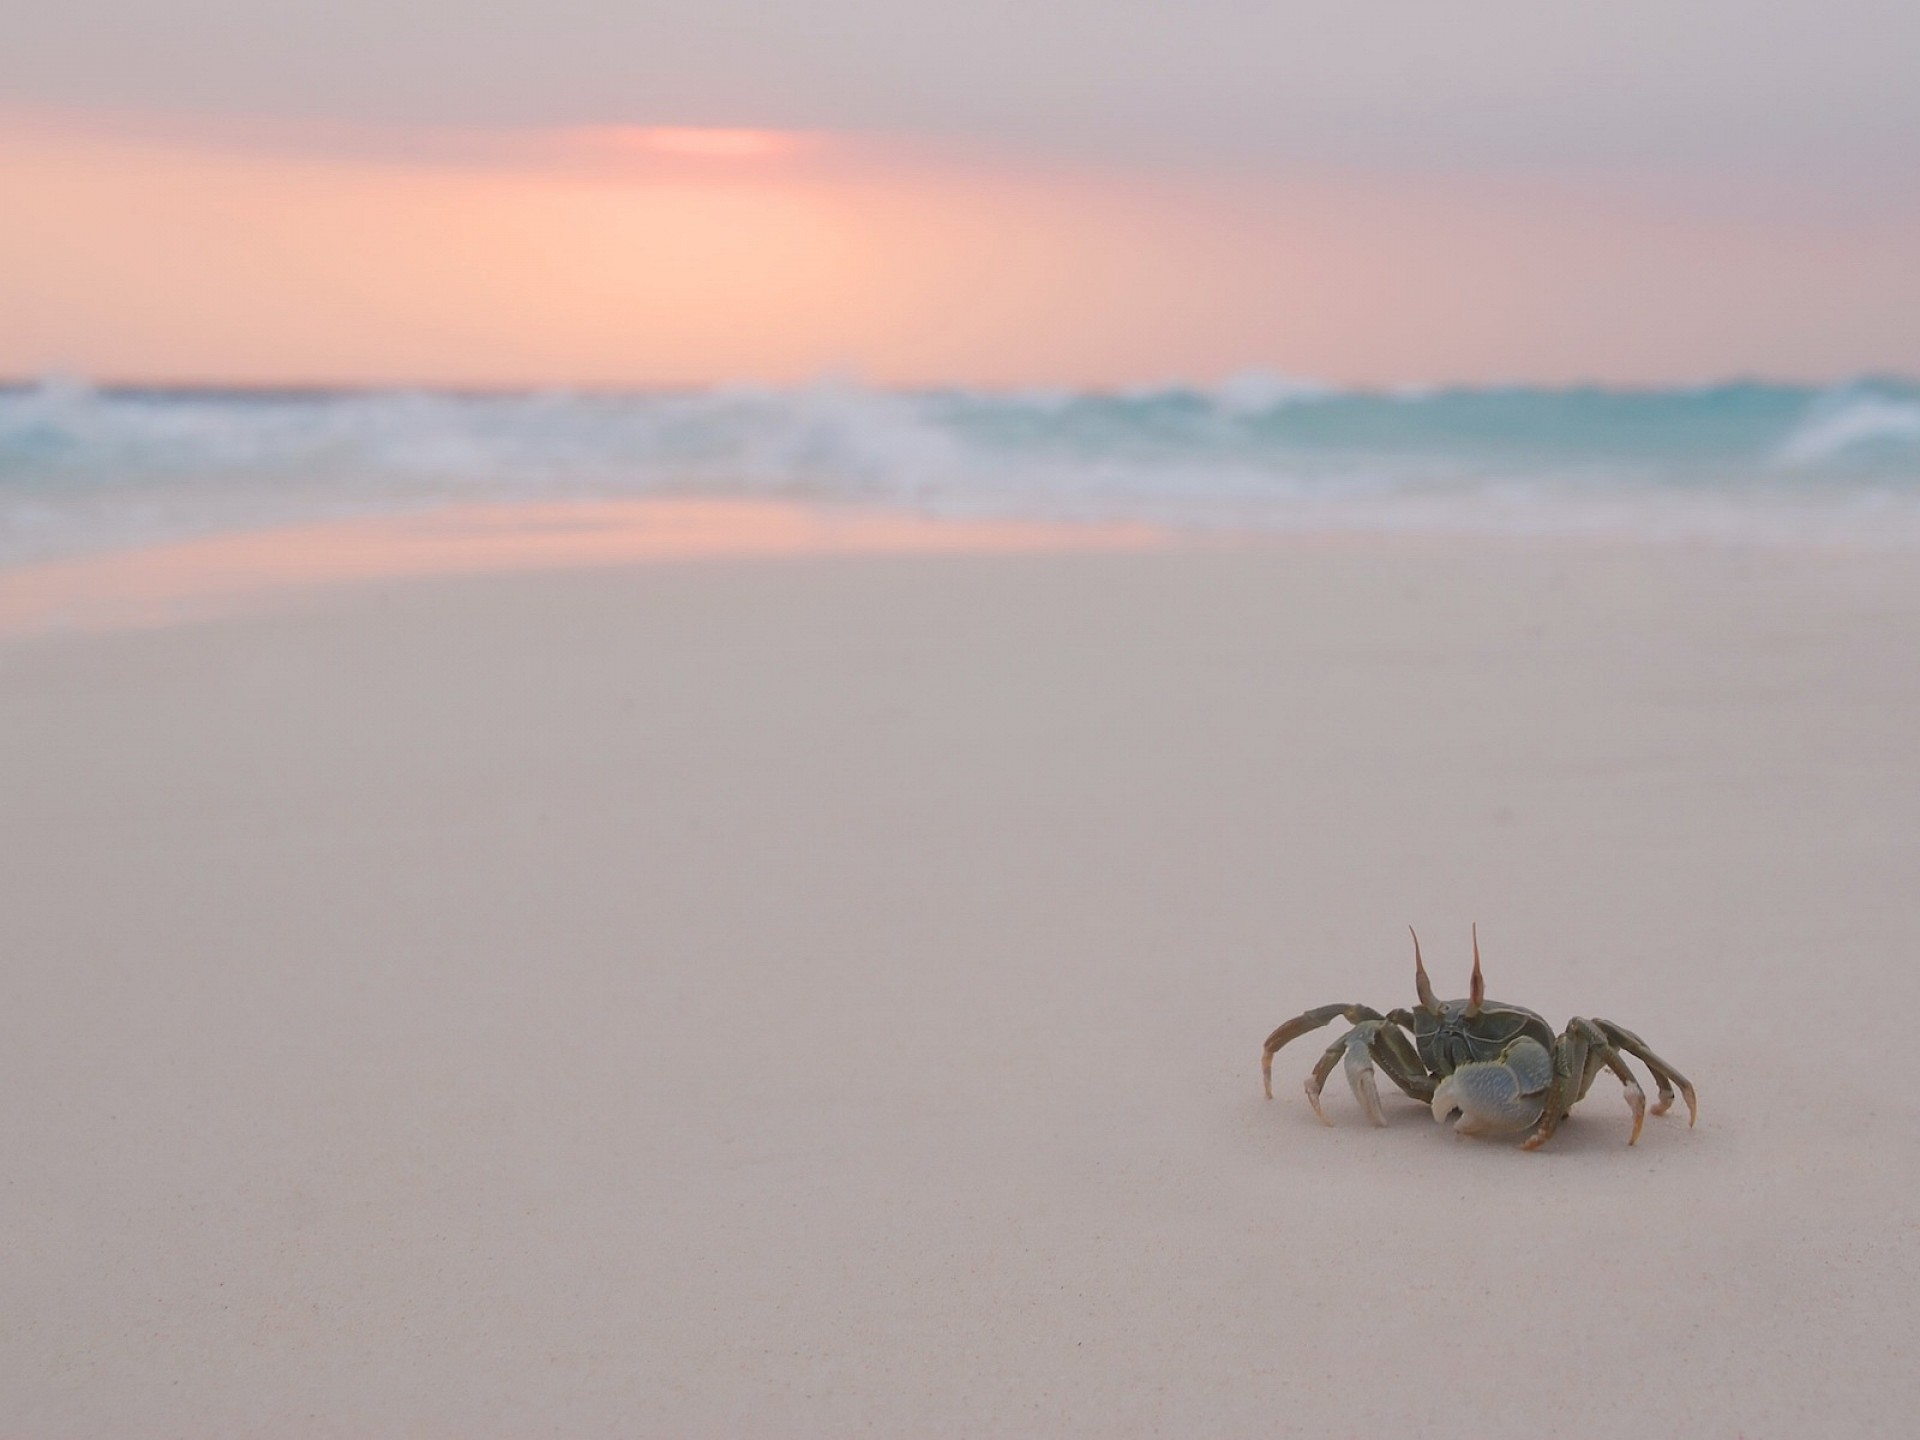 Crab On The Beach Wallpaper - Download Wallpaper Nature Free